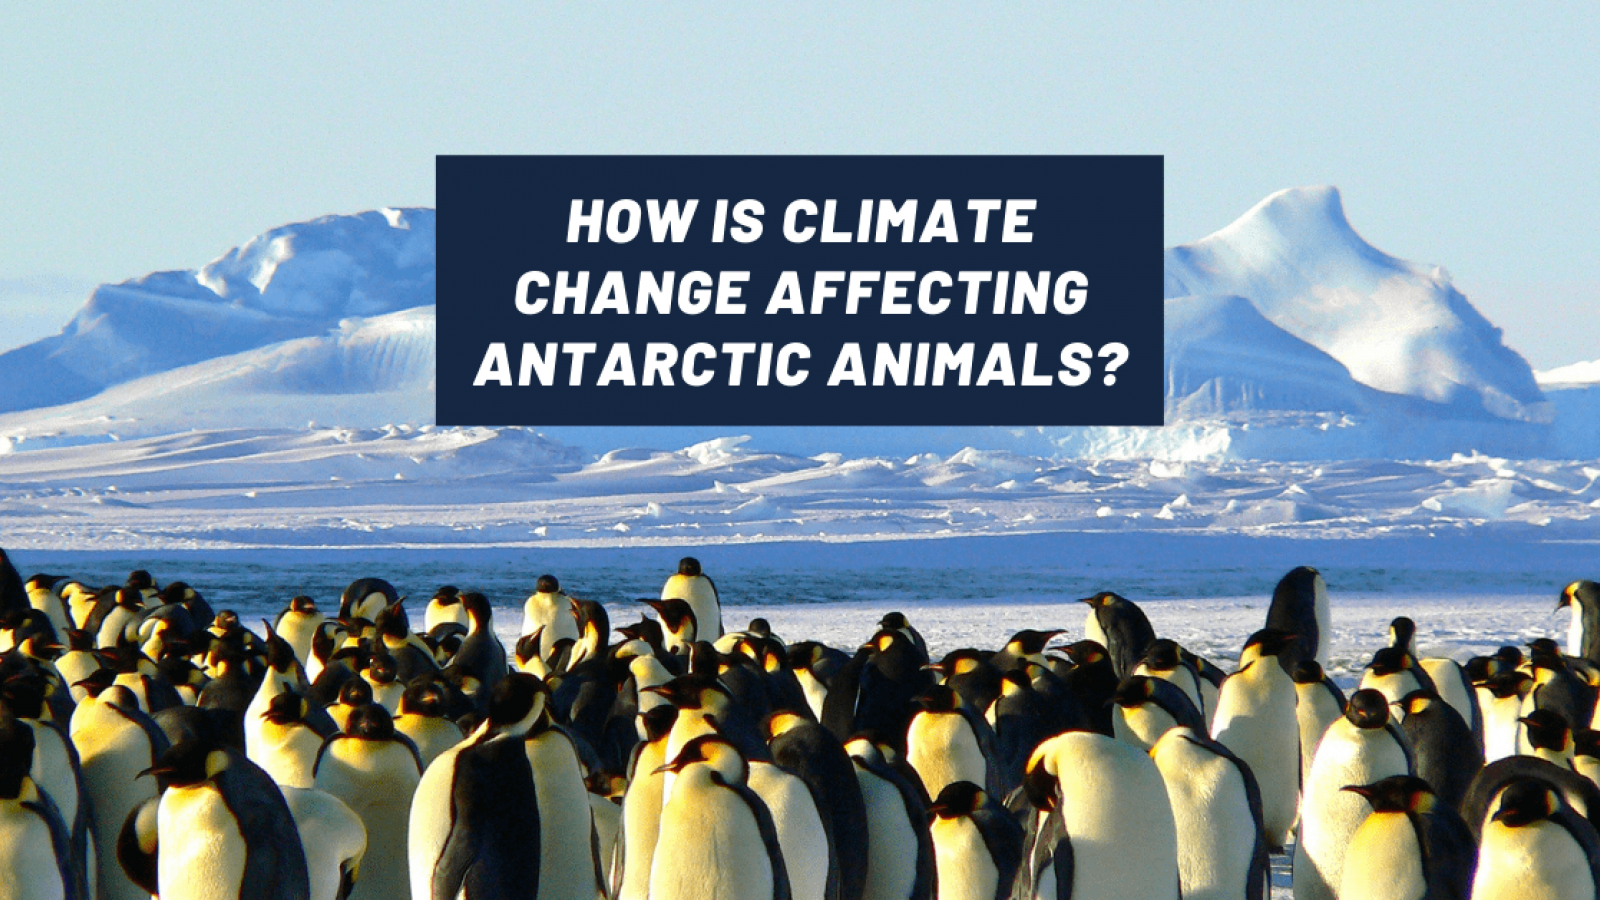 How is climate change affecting Antarctic animals?